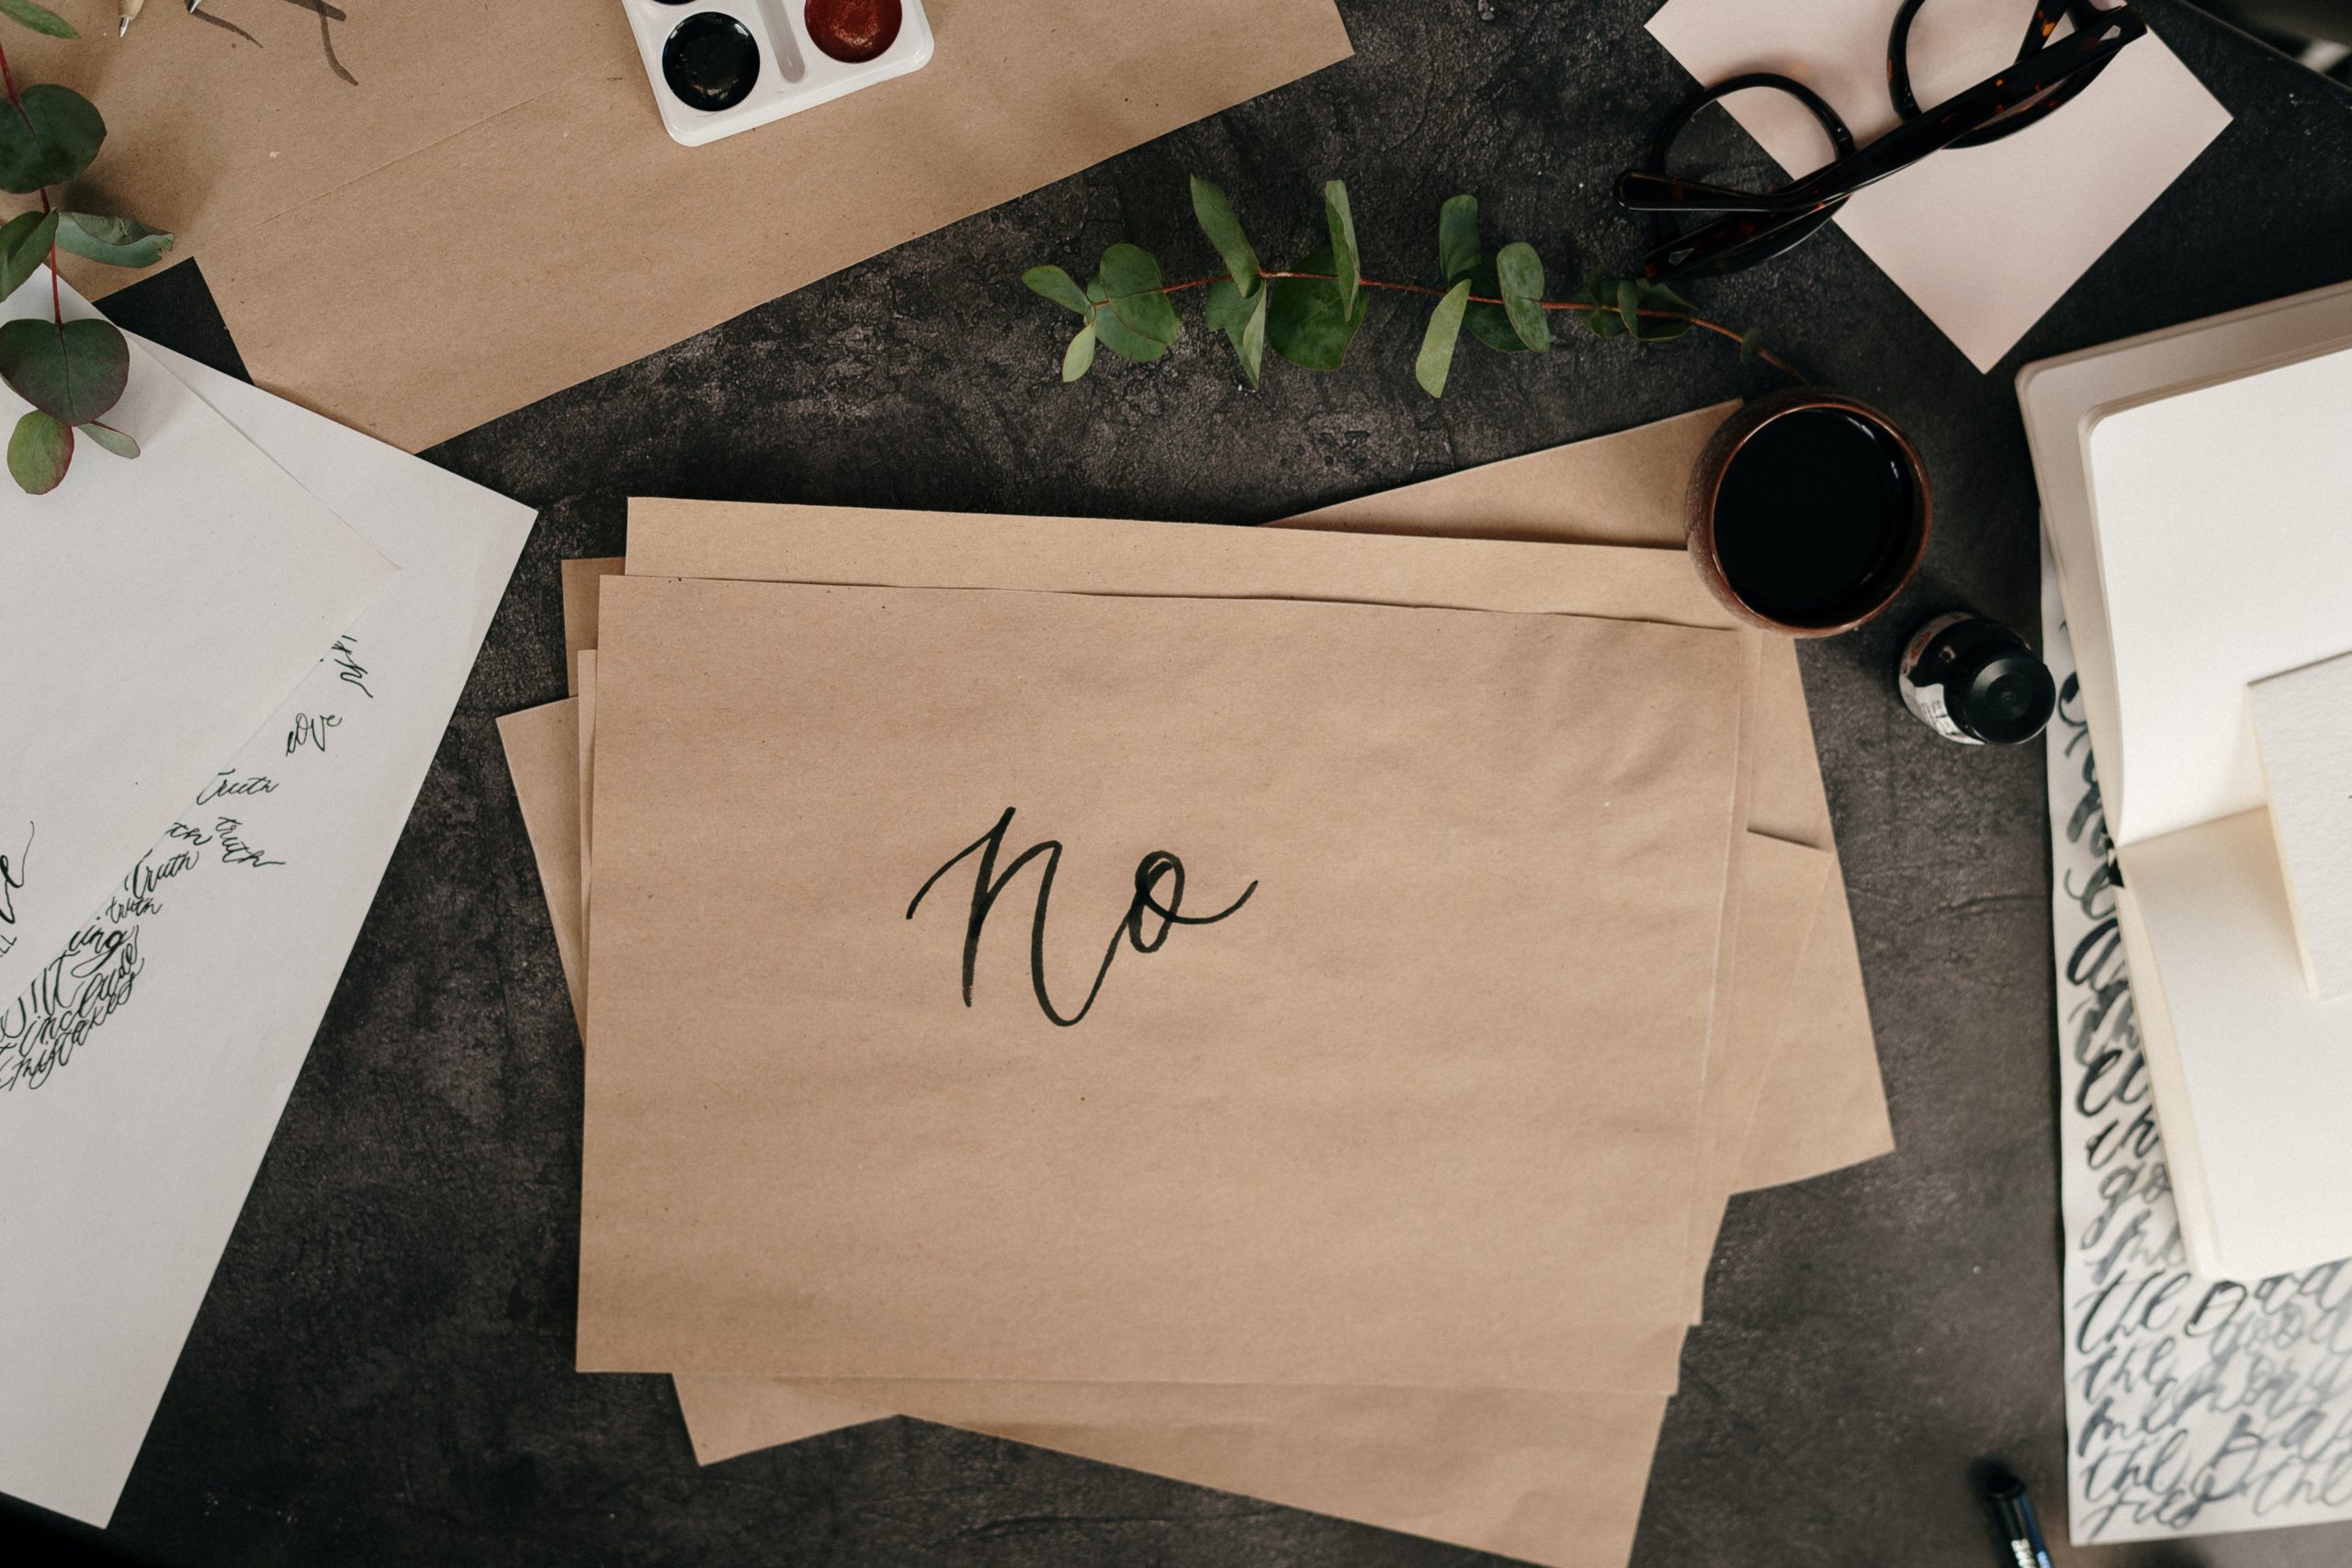 The word “no” written on brown paper